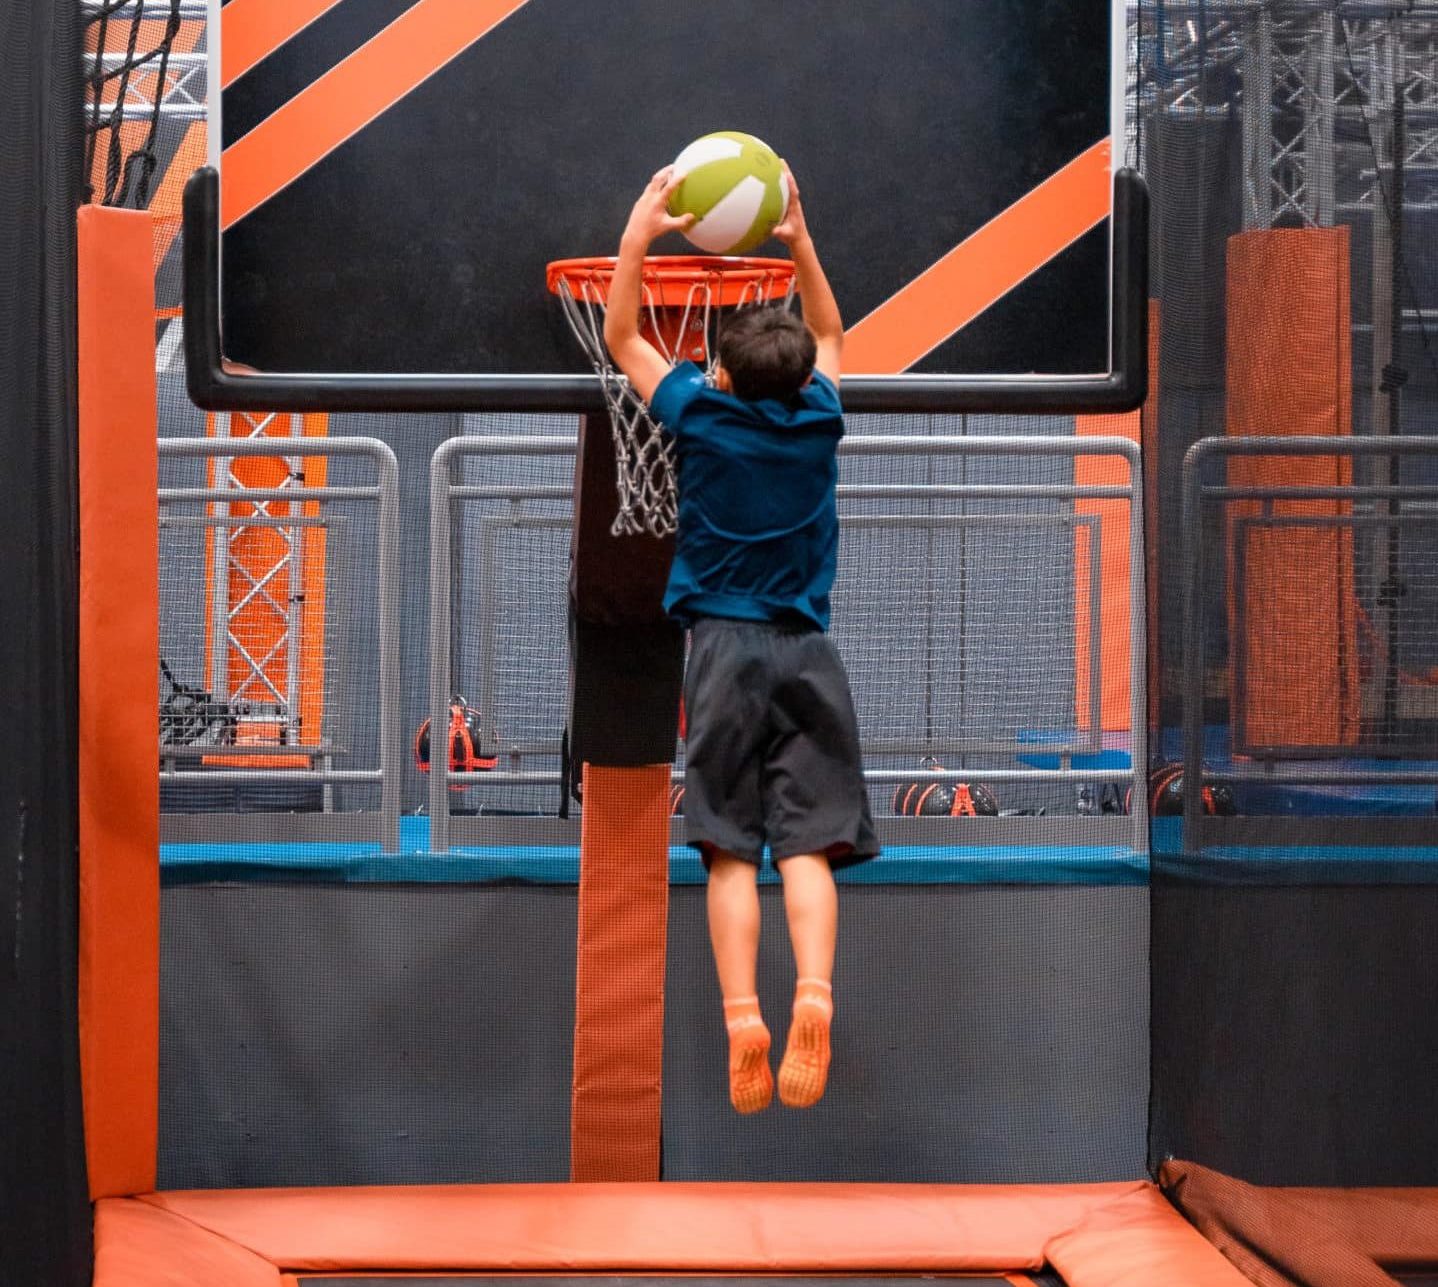 Top 10 Best Trampoline Parks near VICTOR, NY 14564 - Last Updated